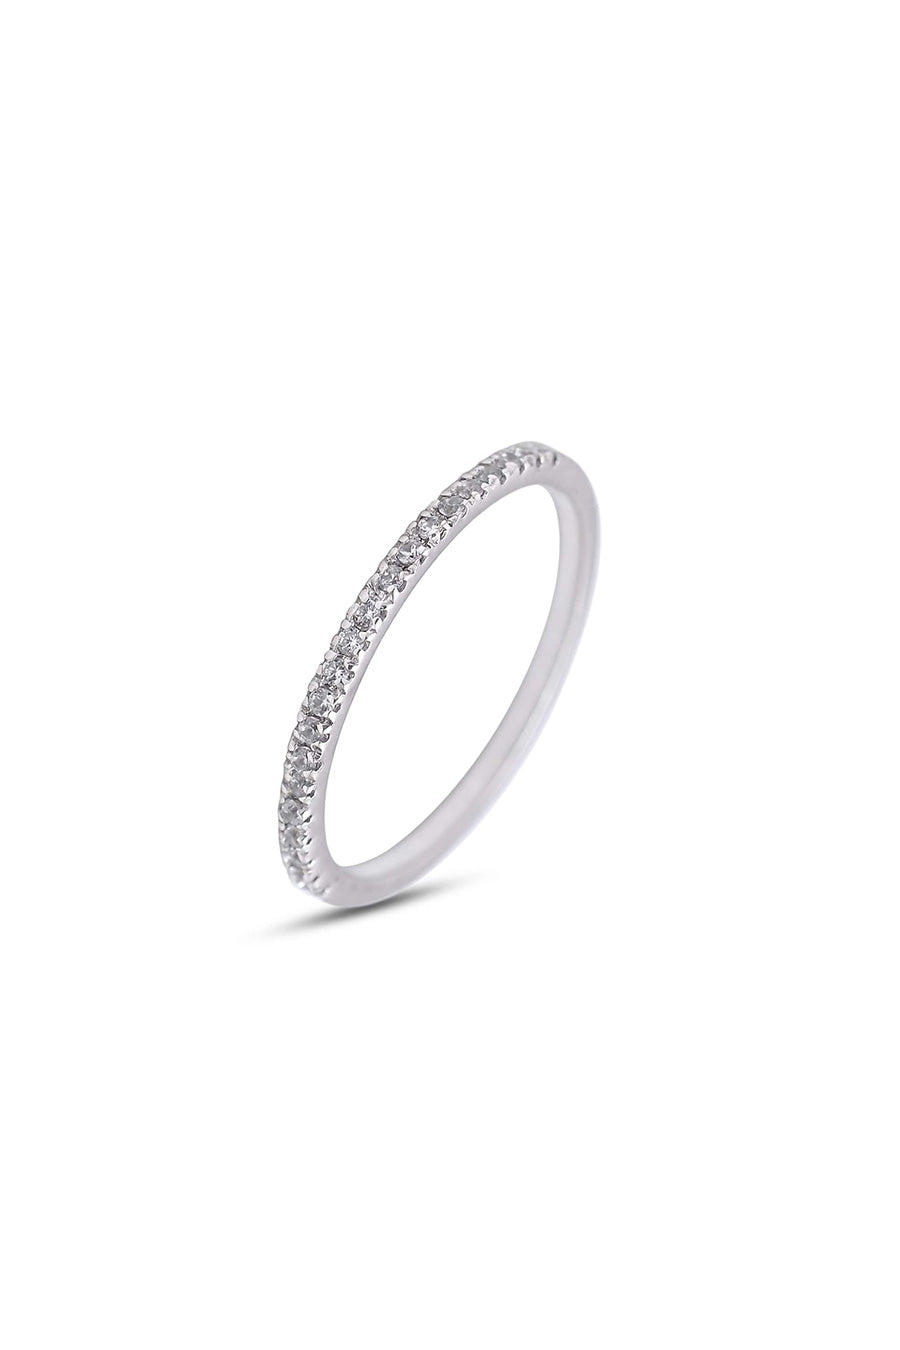 White Topaz Stacking Ring in 925 Silver (Set of 2)